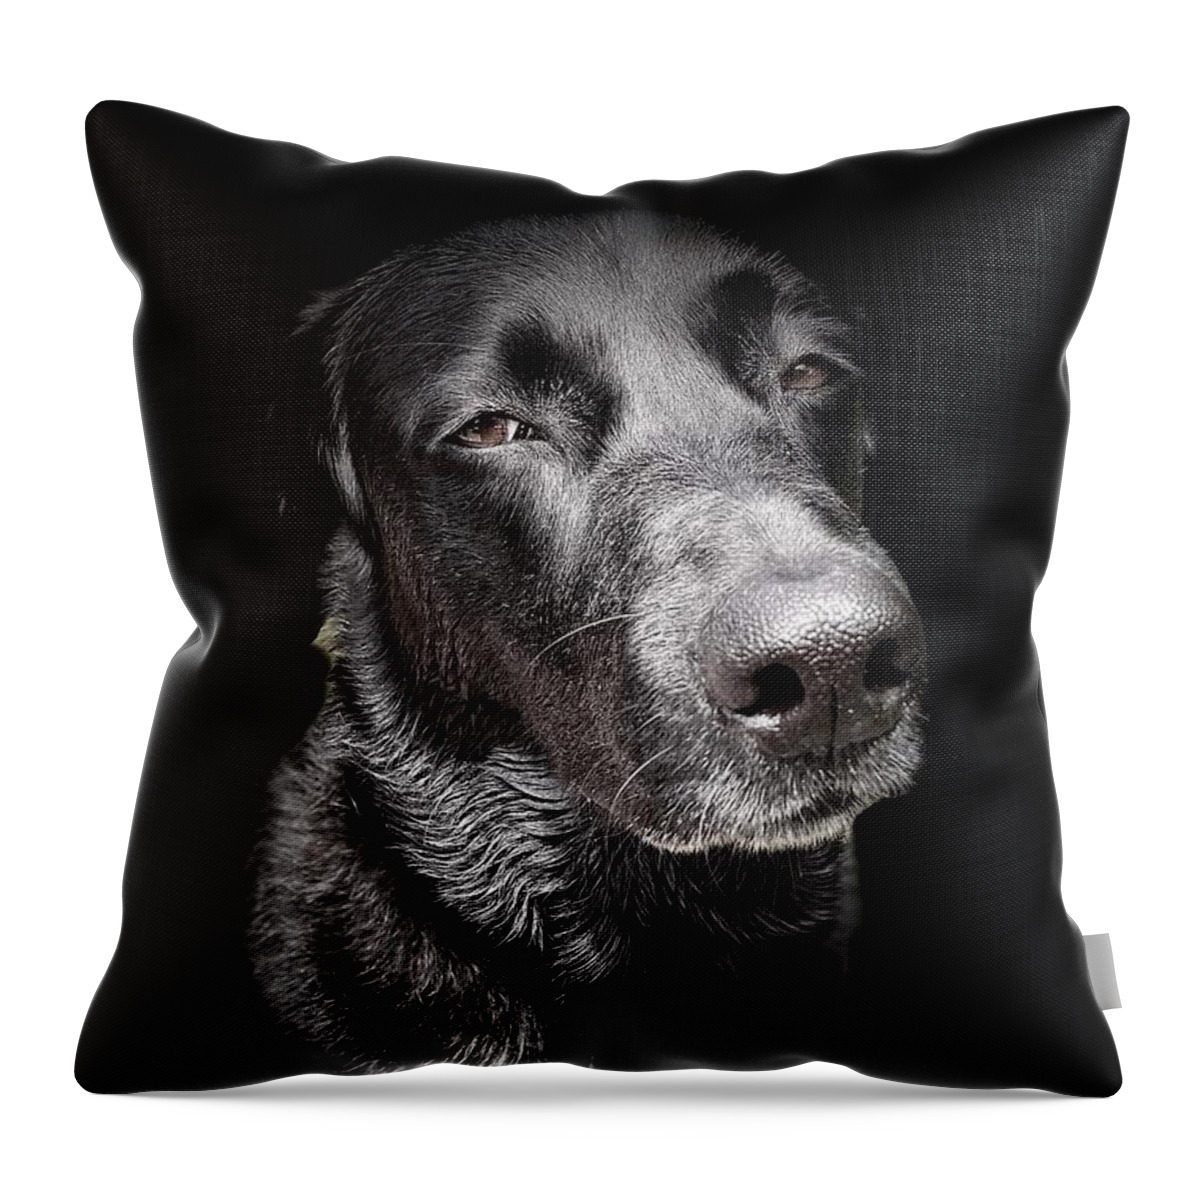 Dog Throw Pillow featuring the photograph My Dog Darby by David Letts